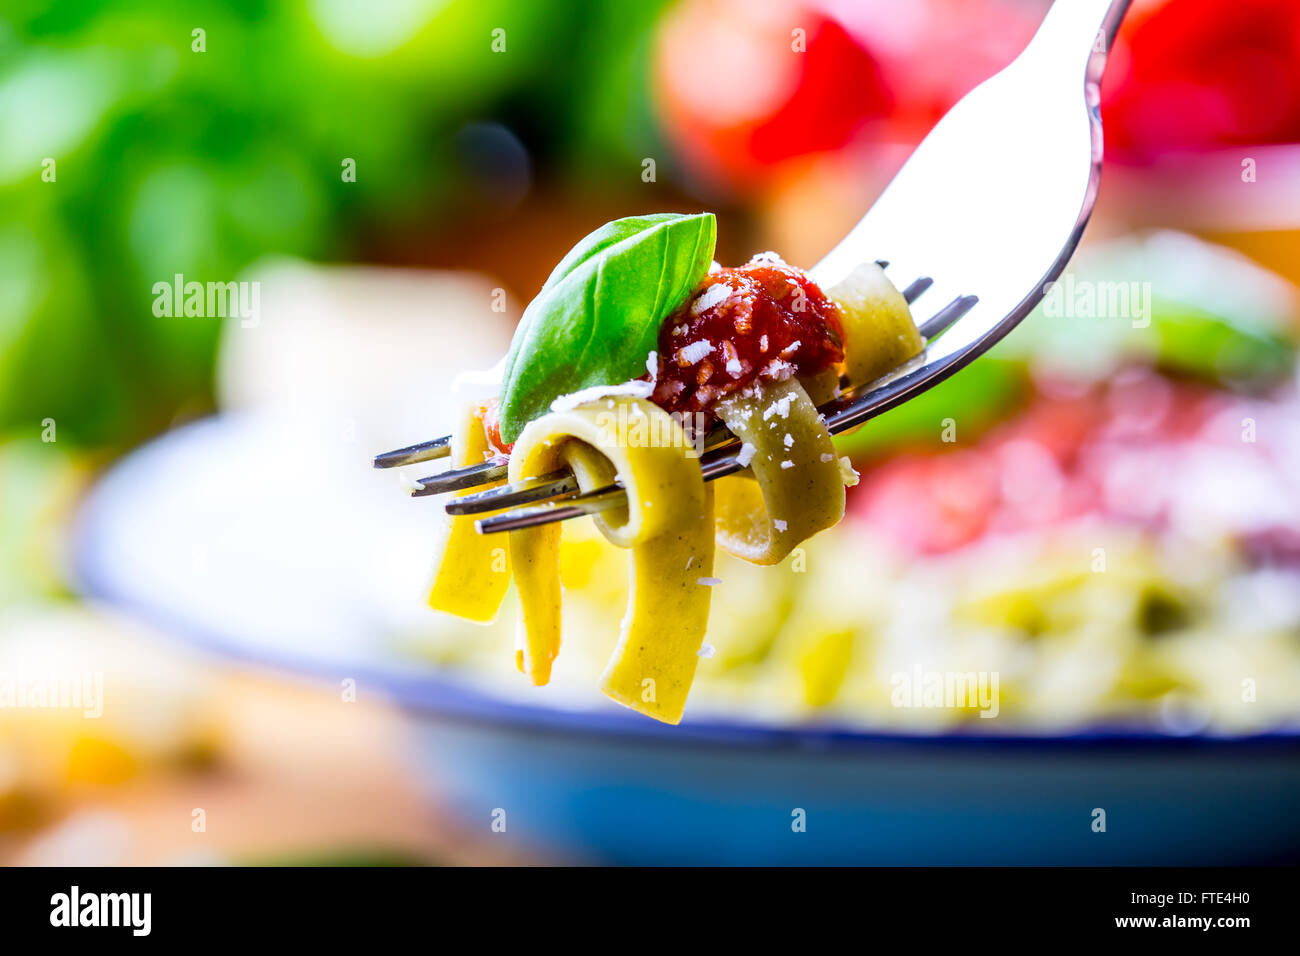 Pasta. Italian and Mediterranean cuisine. Pasta Fettuccine with tomato sauce basil leaves garlic and parmesan cheese. Stock Photo